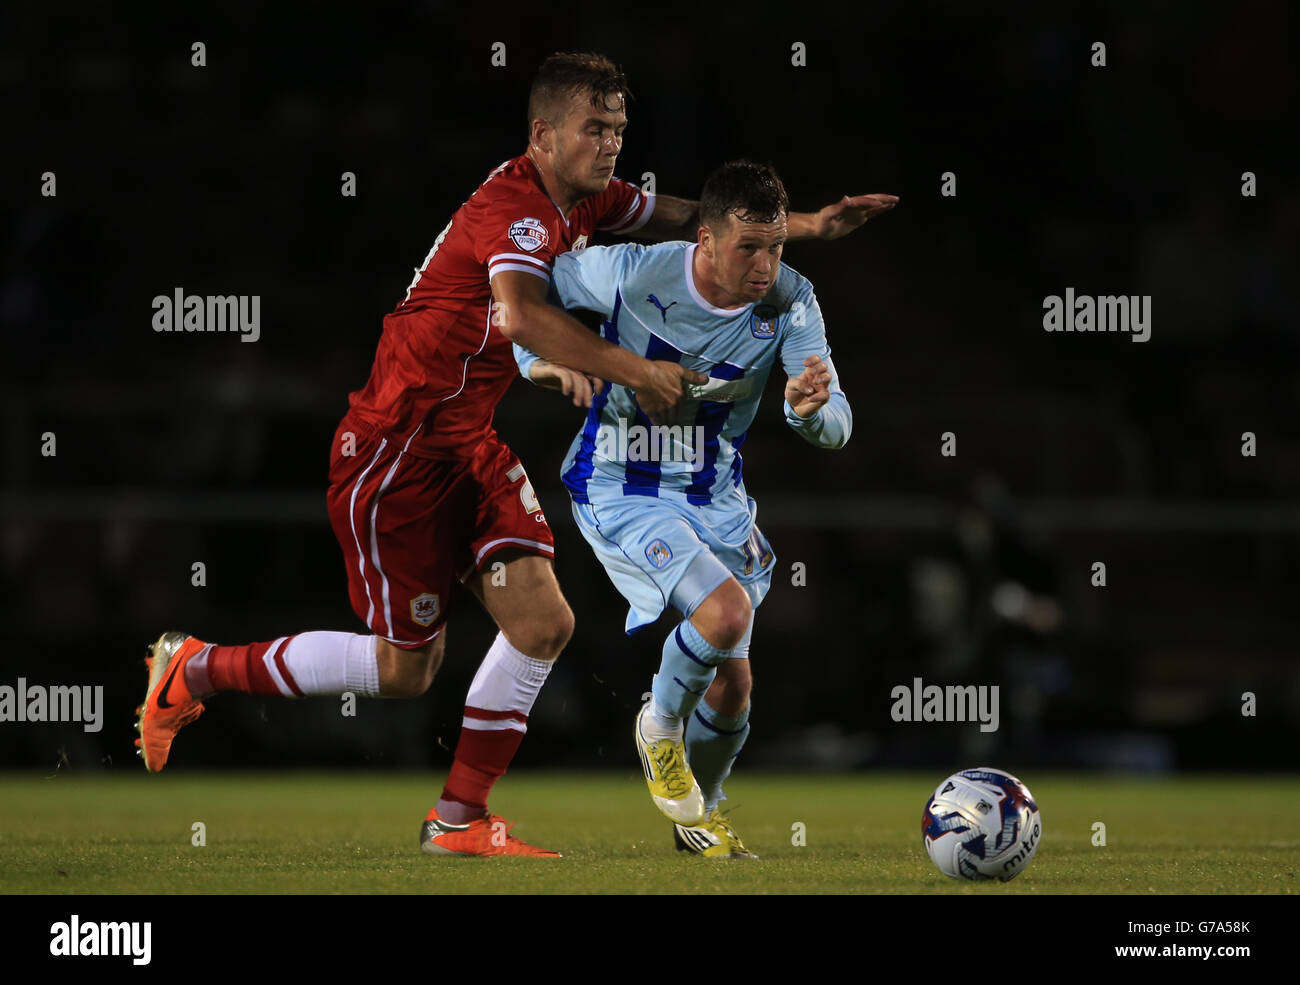 Coventry City's Danny Swanson breaks past Cardiff City's Joe Ralls, during the Capital One Cup First Round match at Sixfields Stadium, Northampton. Stock Photo